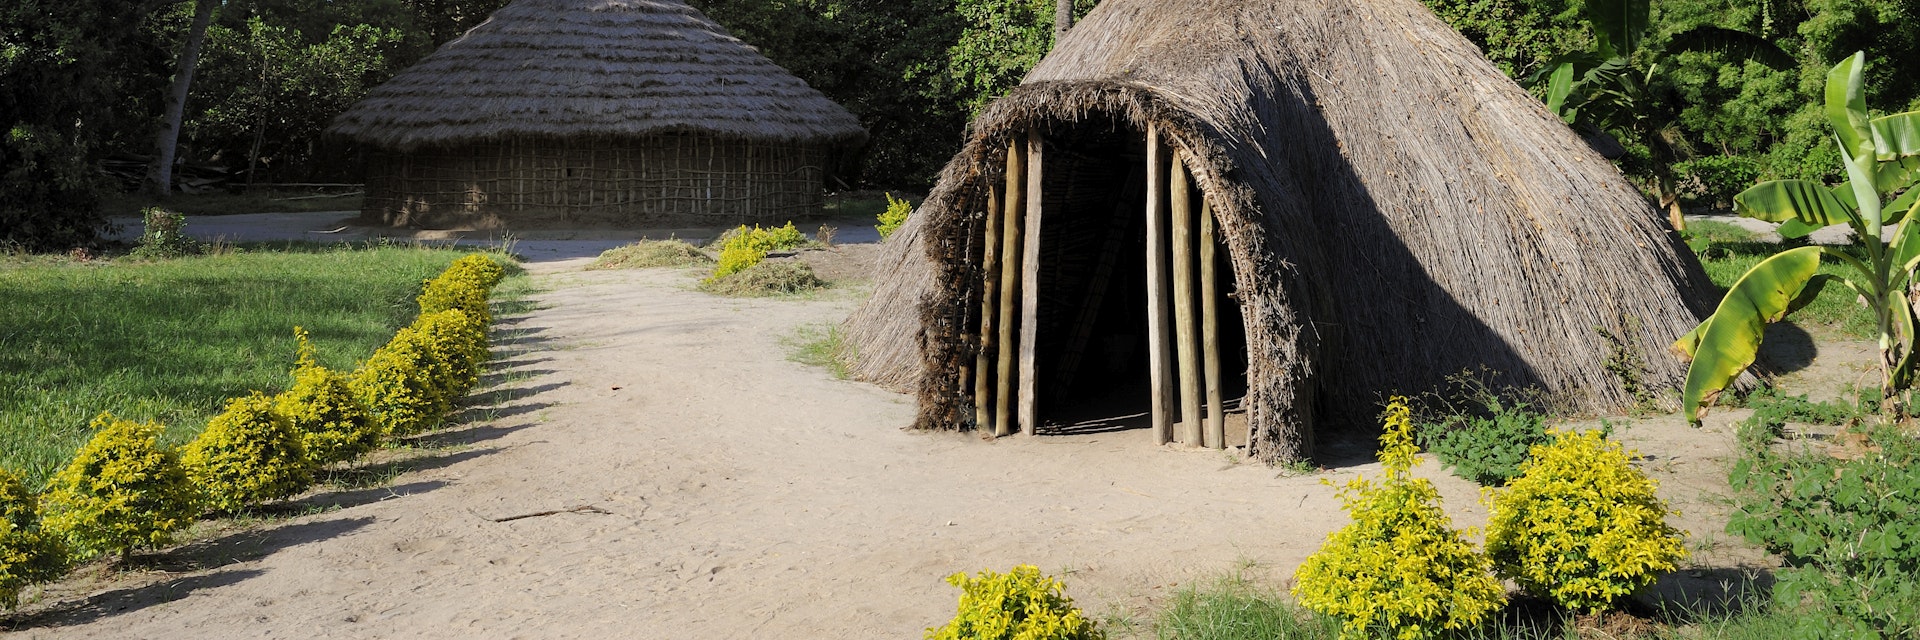 Tanzania, Dar es Salaam, the Village Museum is a series of authentic dwellings depicting the traditional lifestyle of various regions of the country